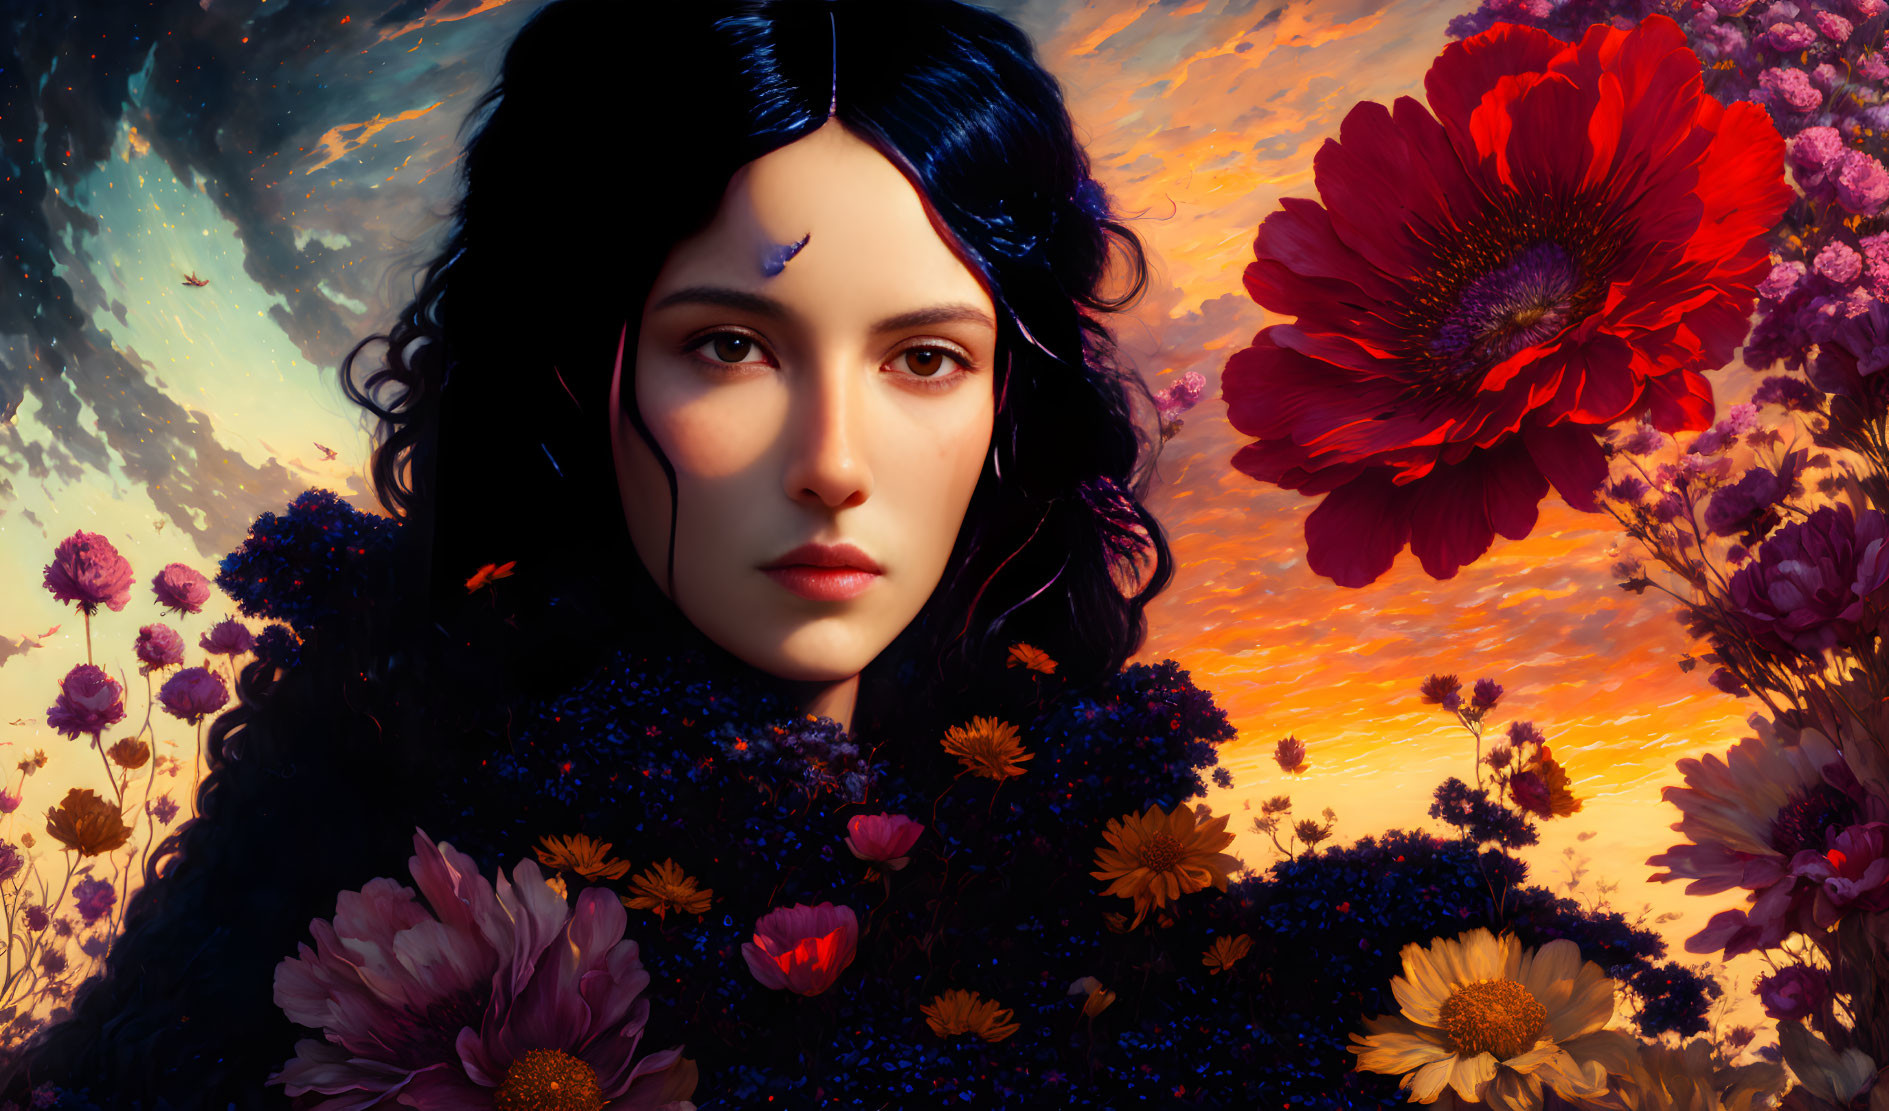 Dark-haired woman surrounded by vibrant flowers in cosmic setting